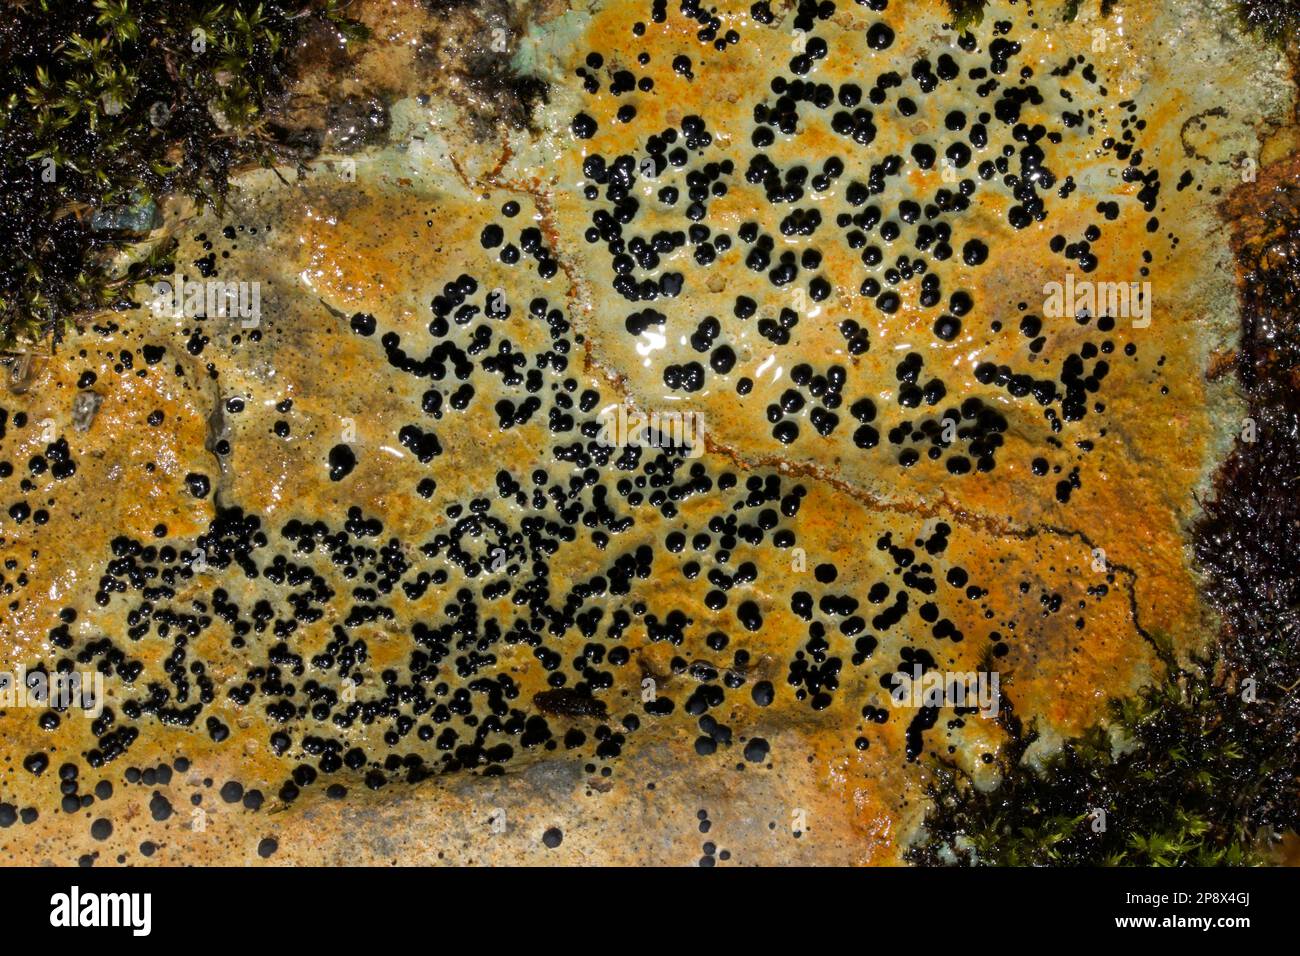 The lichen Porpidia hydrophila is found on siliceous rocks in and beside upland lakes and streams. It occurs throughout Europe and Asia. Stock Photo